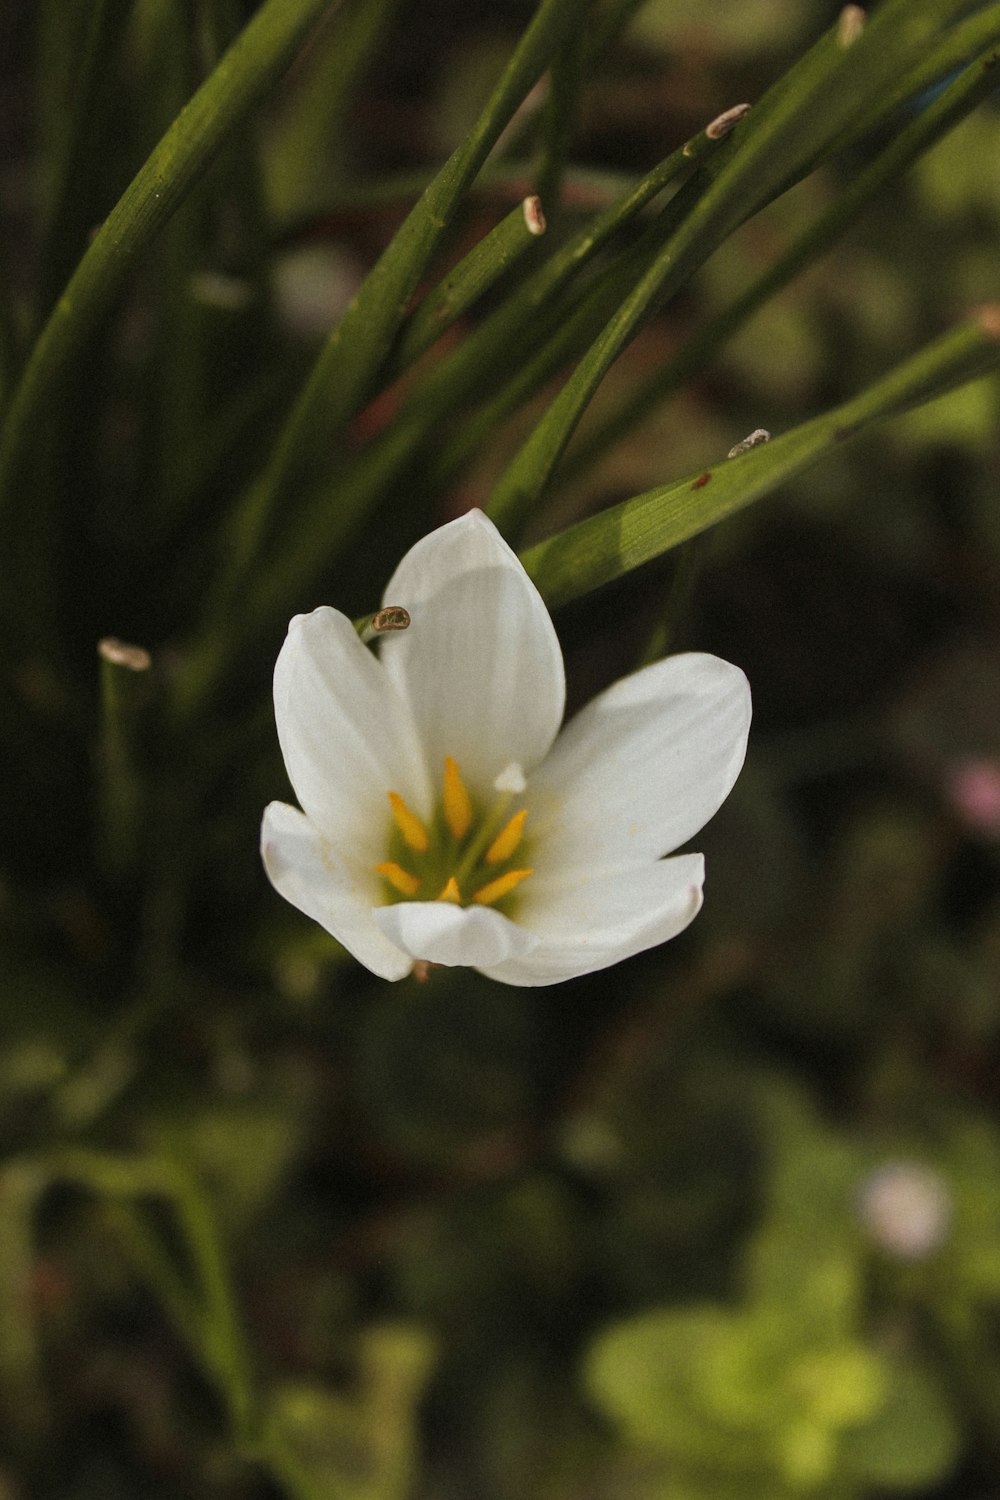 a small white flower with a yellow center